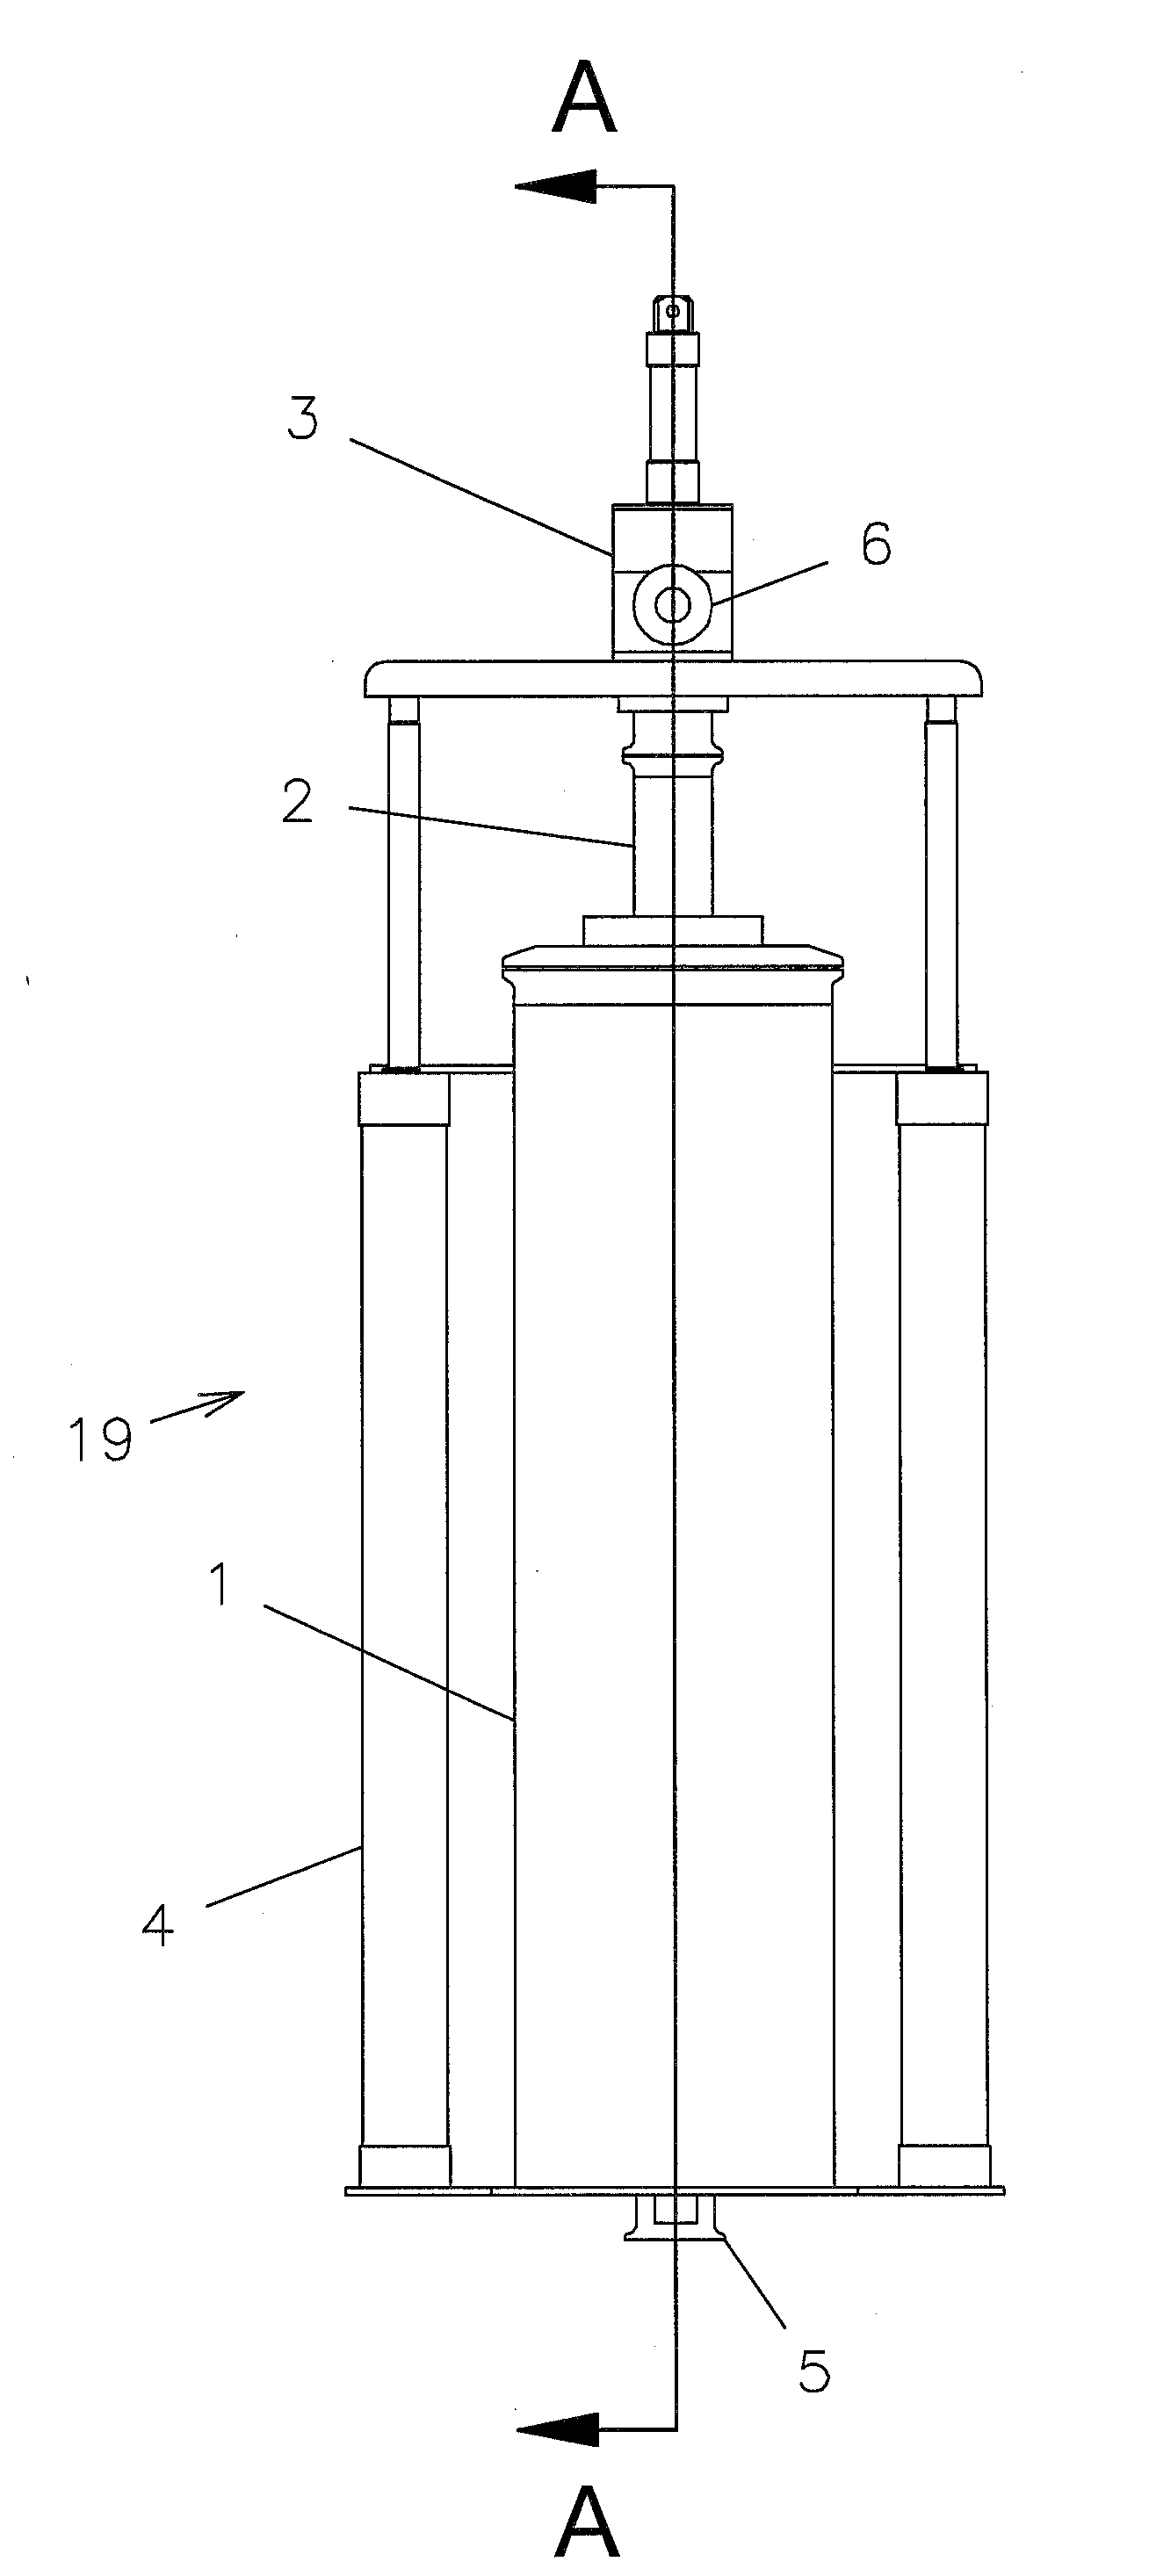 Auto-Cleaning Marination Filter for Poultry Injector System